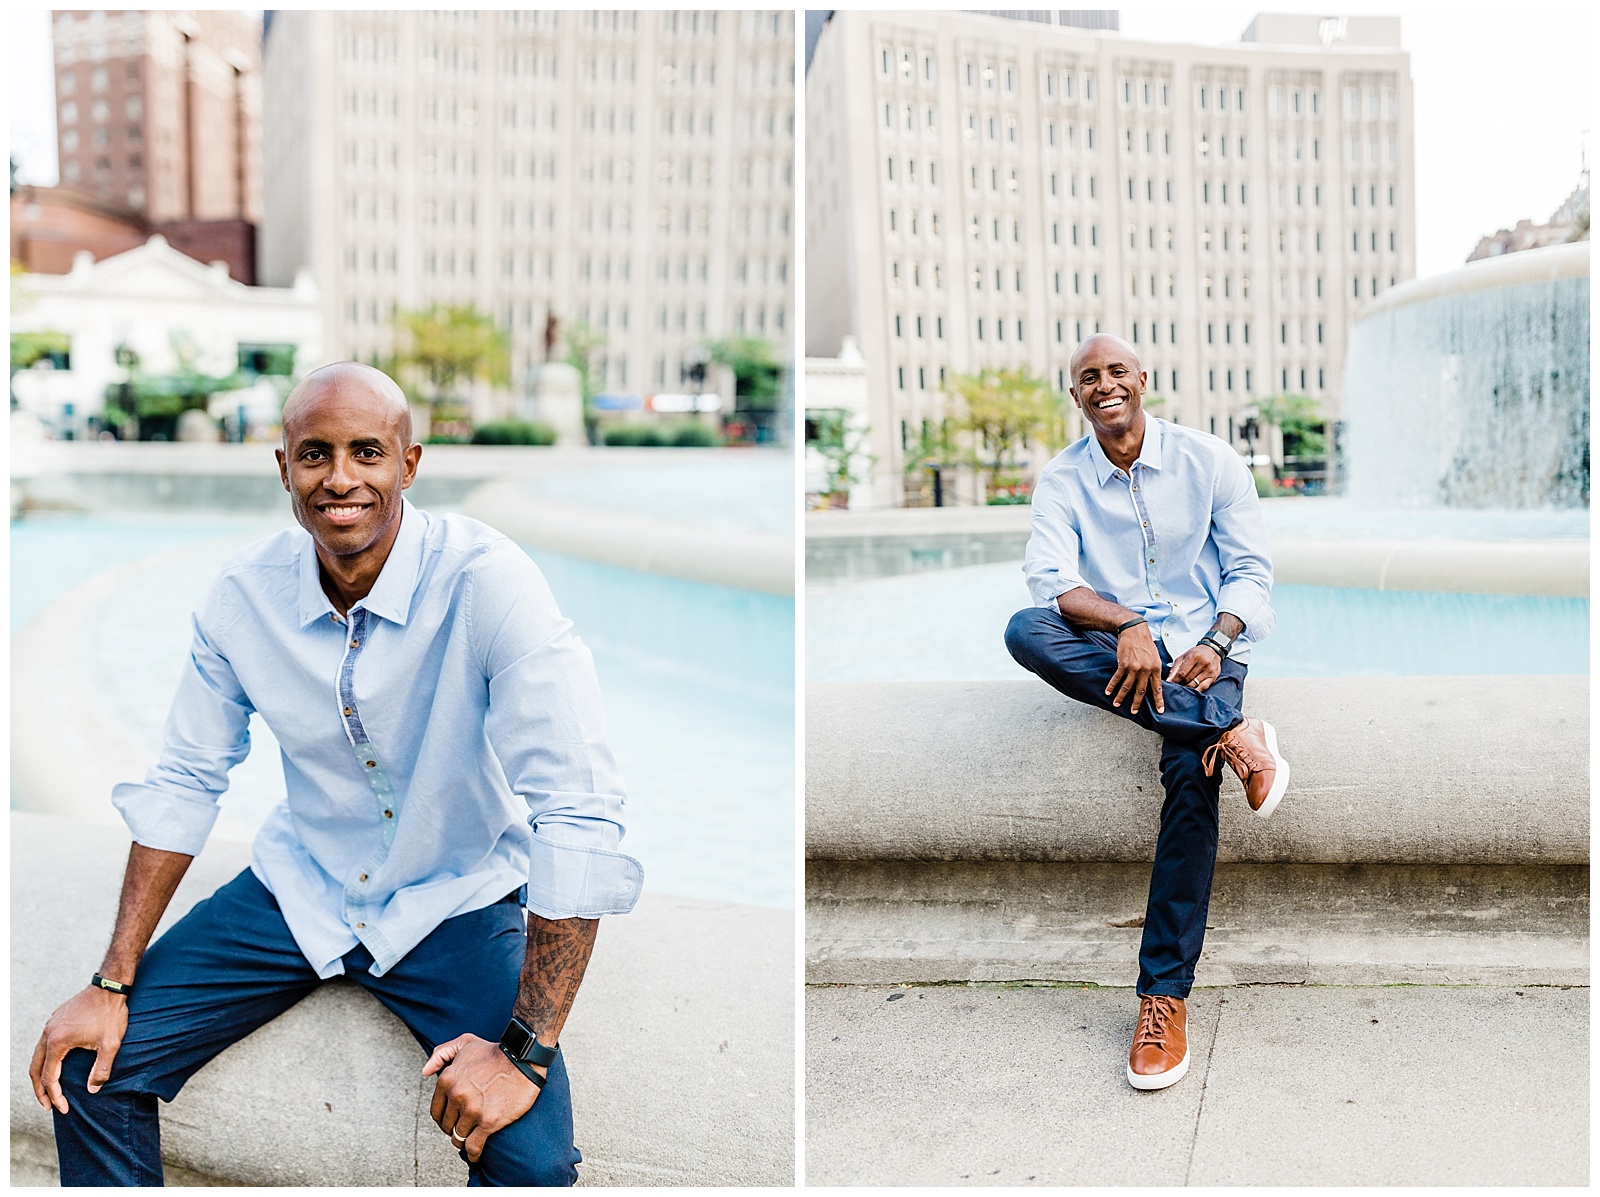 Indianapolis Photography, Indiana Photographer, Indianapolis Headshot Photographer, Lifestyle Headshot Photos, Downtown Indianapolis, Fun headshot photos, Derick Grant Results, Leah Rife Photo